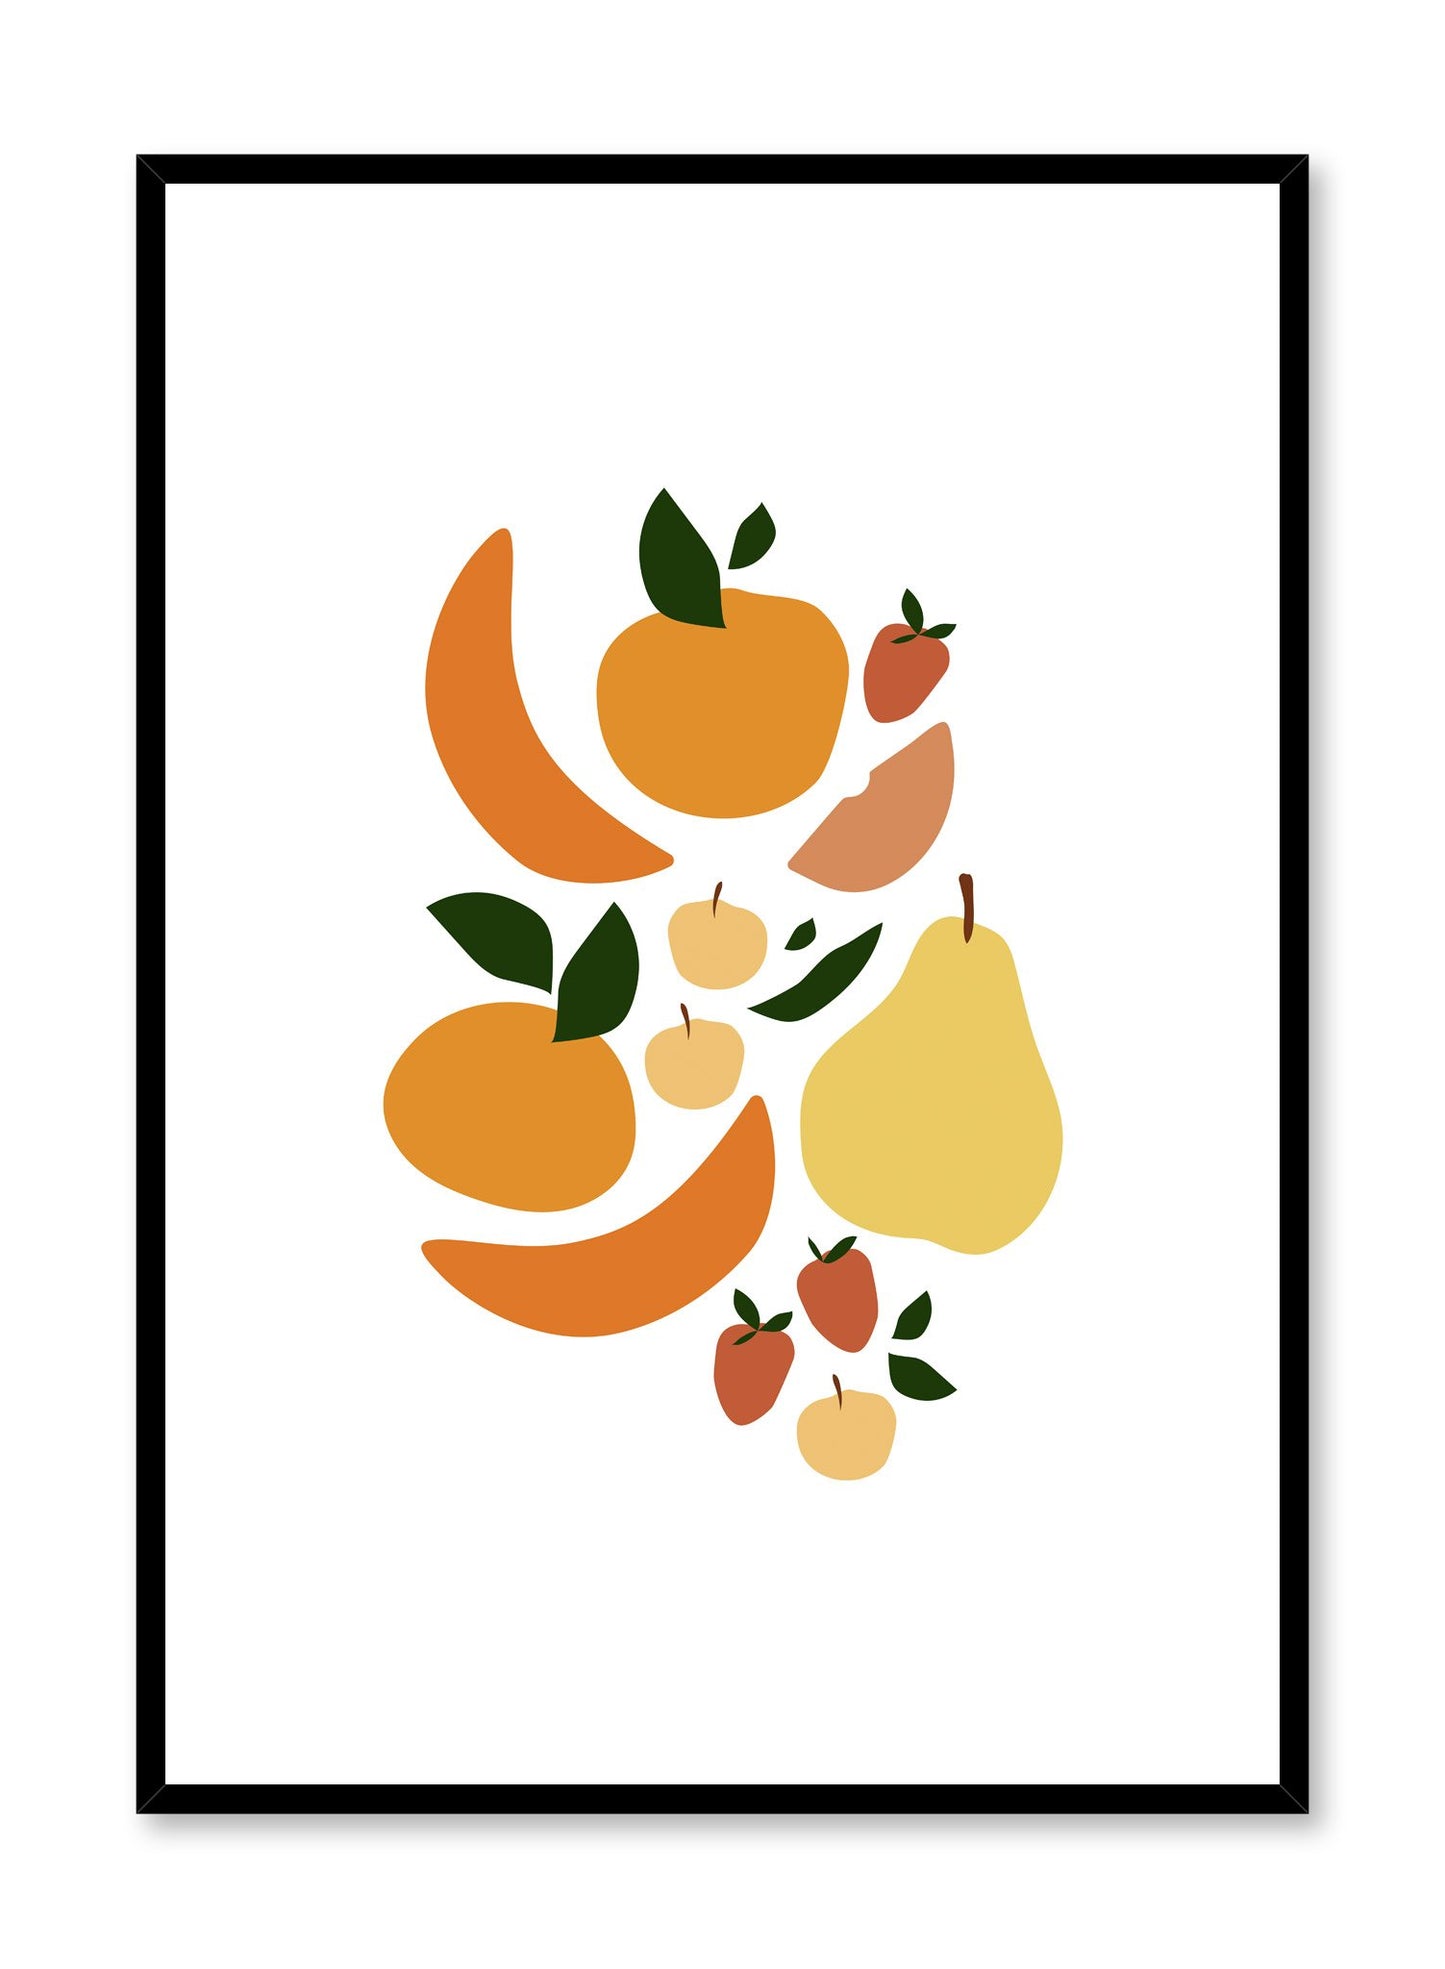 Minimalist poster by Opposite Wall with Fruit Salad illustration